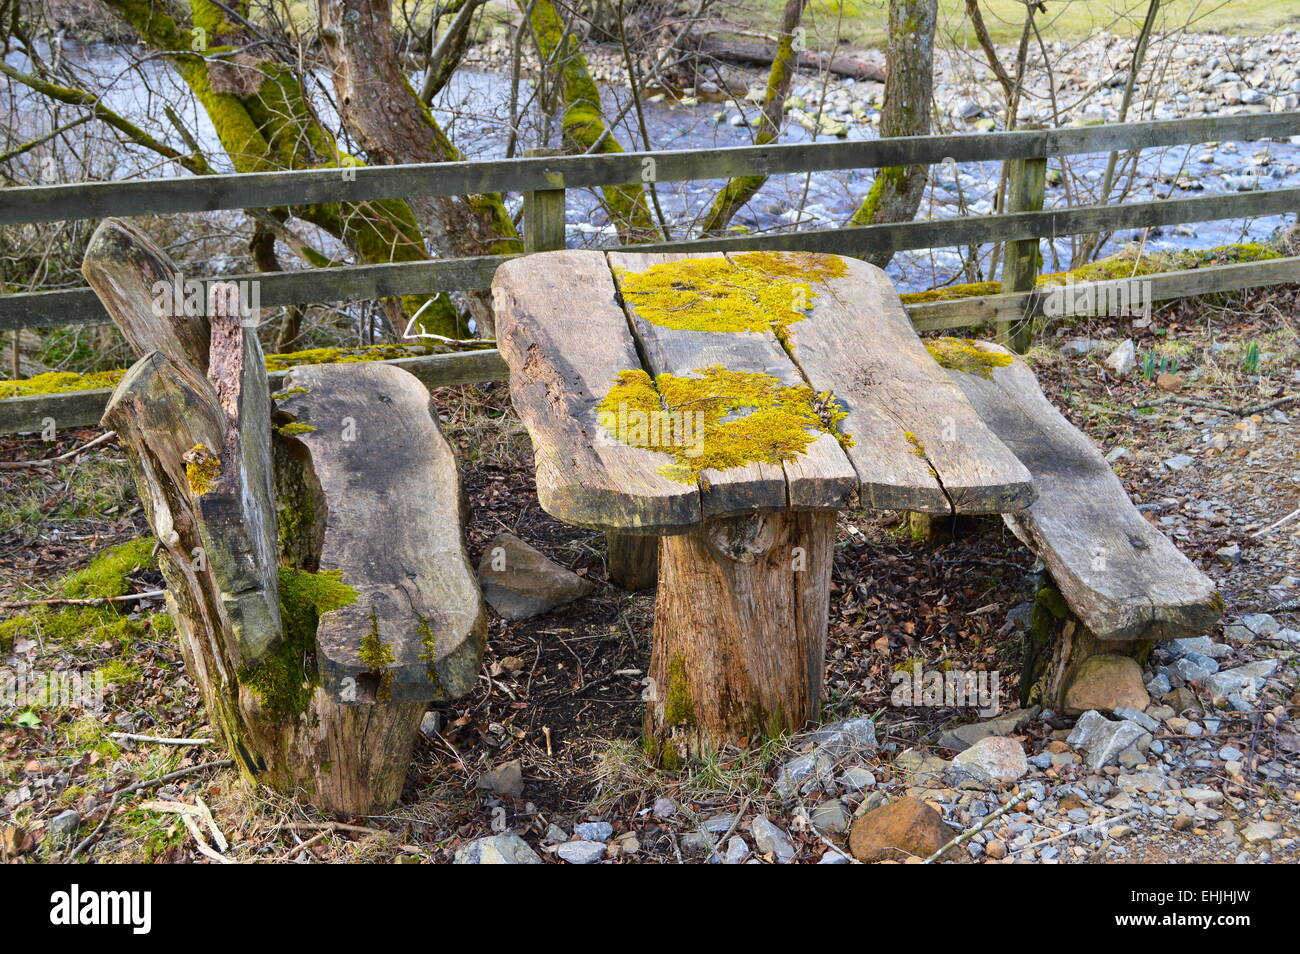 Rustic wood picnic bench and seats. Stock Photo